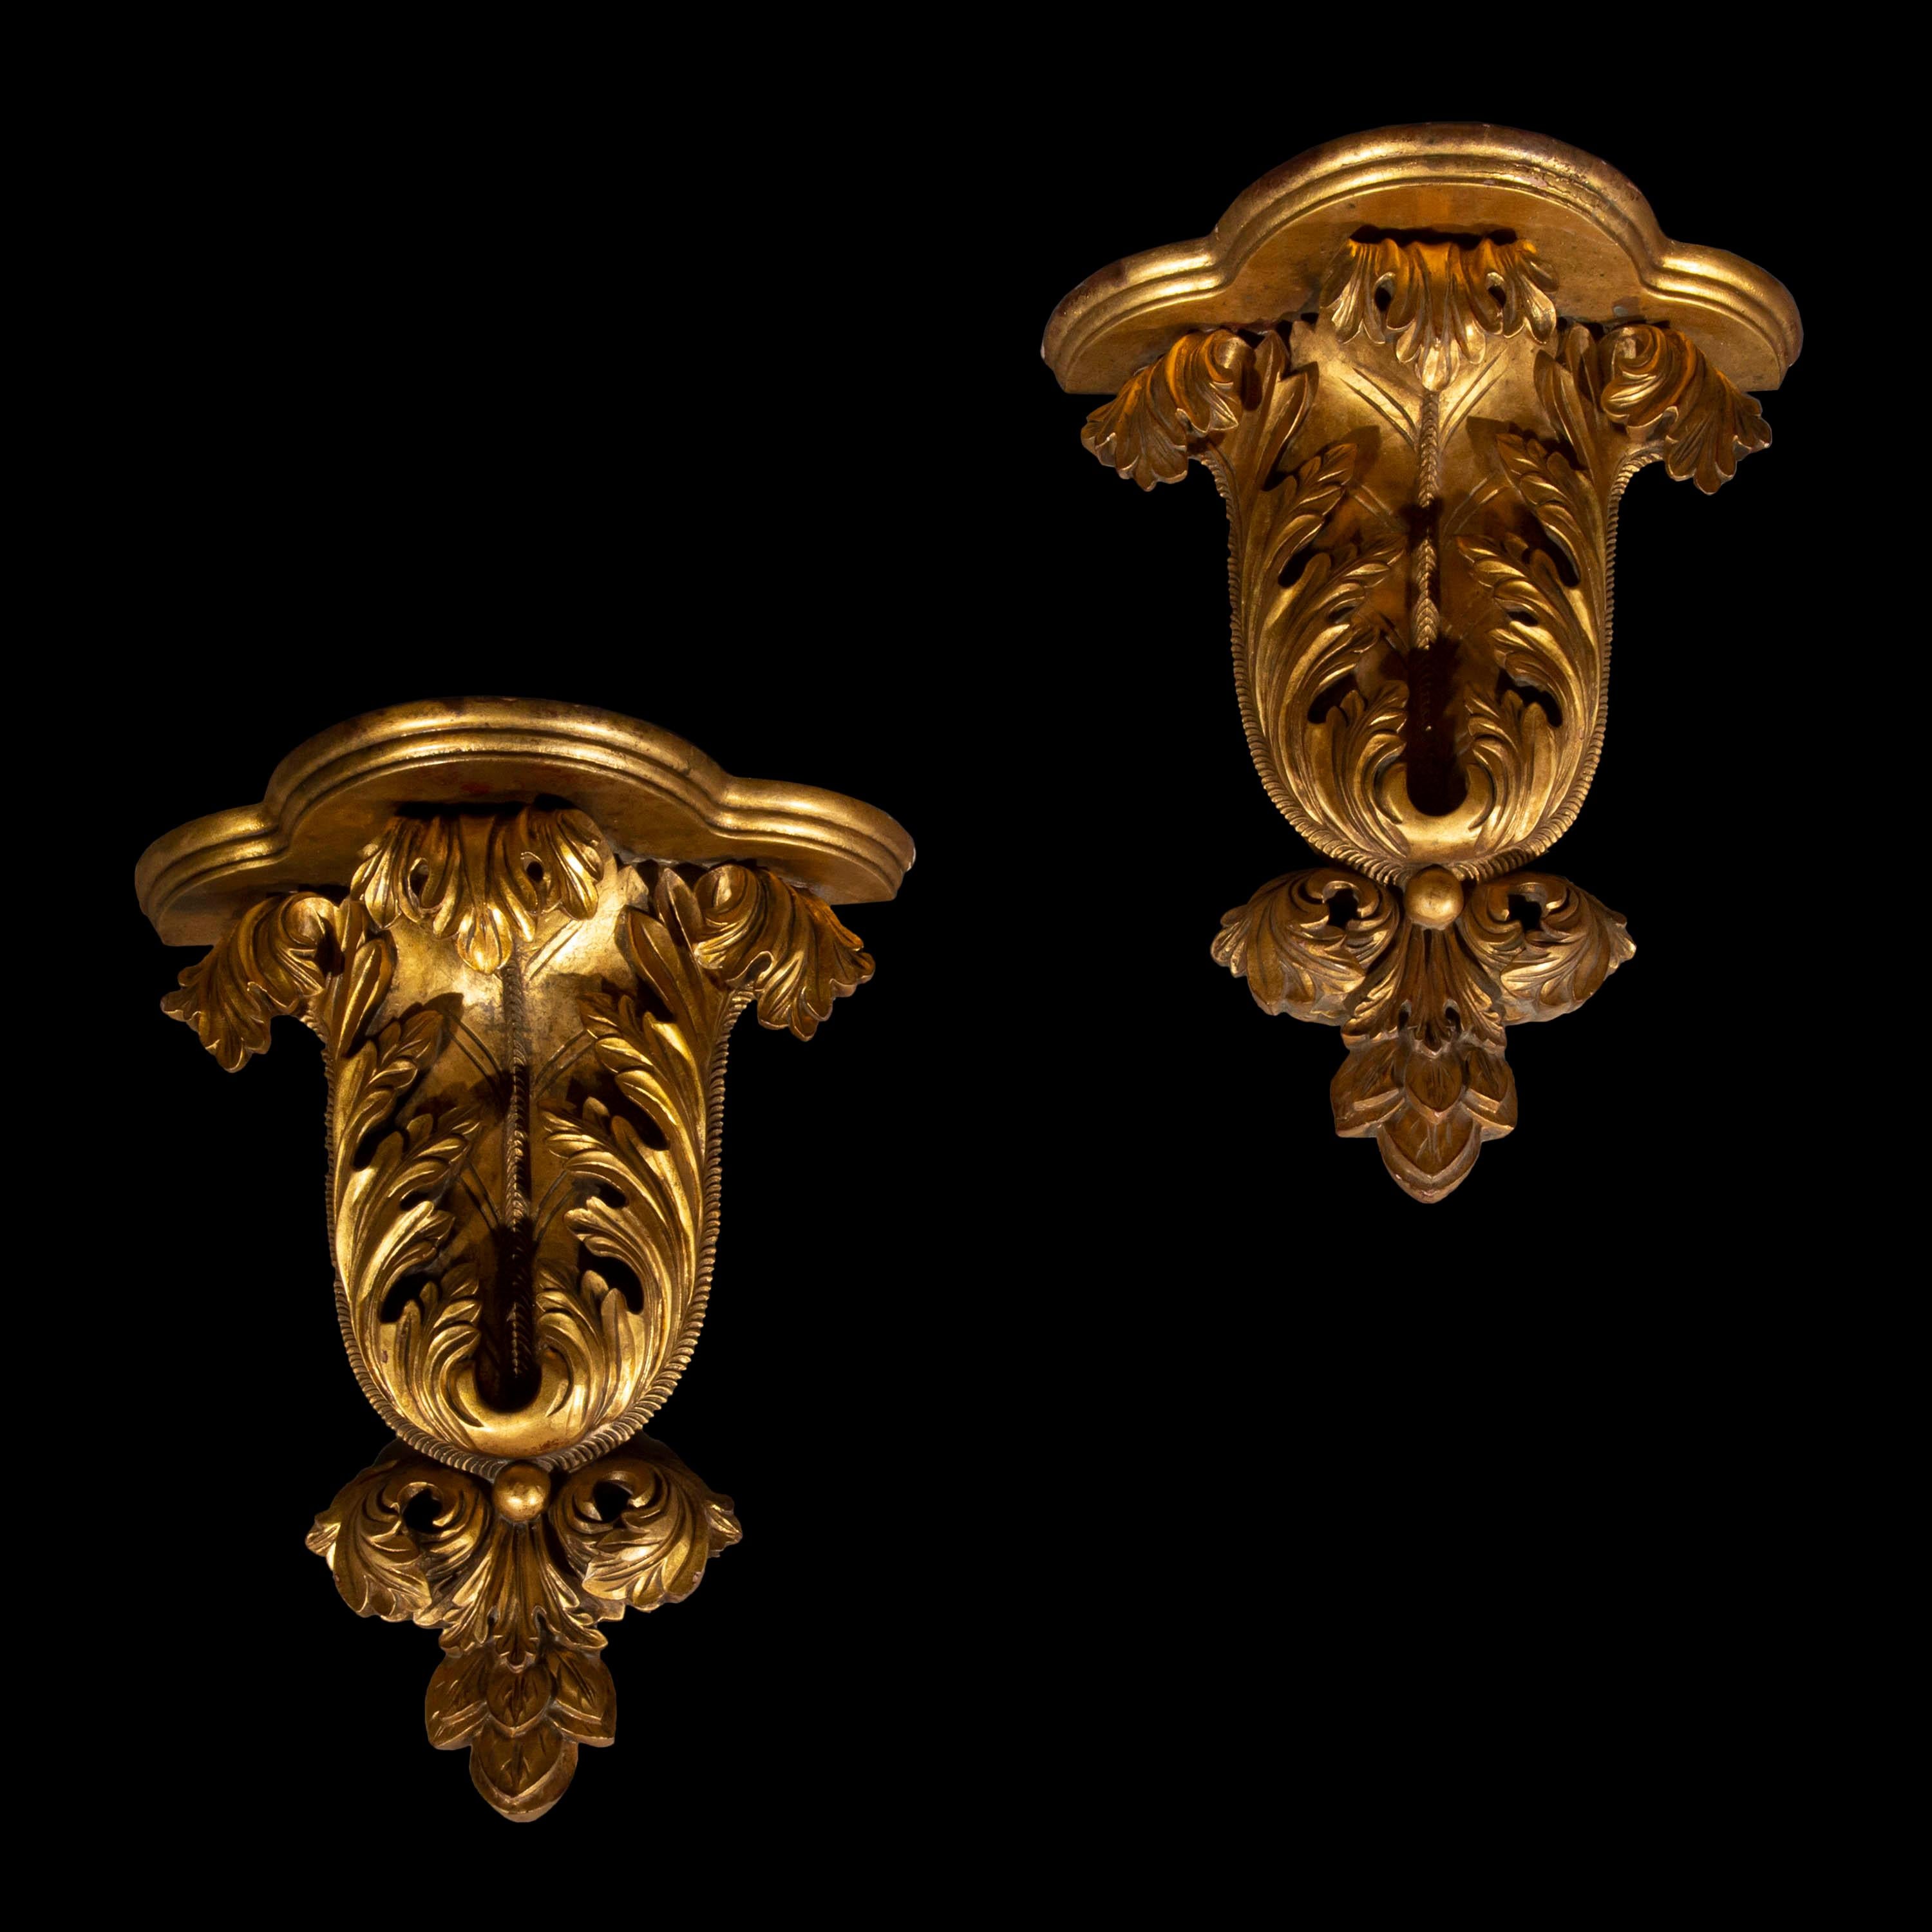 A decorative pair of carved and gilded wood wall brackets in the William Kent Baroque taste, shaped as roman acanthus foliage,
early to mid-20th century.

Why we like them
Boldly sculpted in the manner, evoking the decoration in ancient Rome,